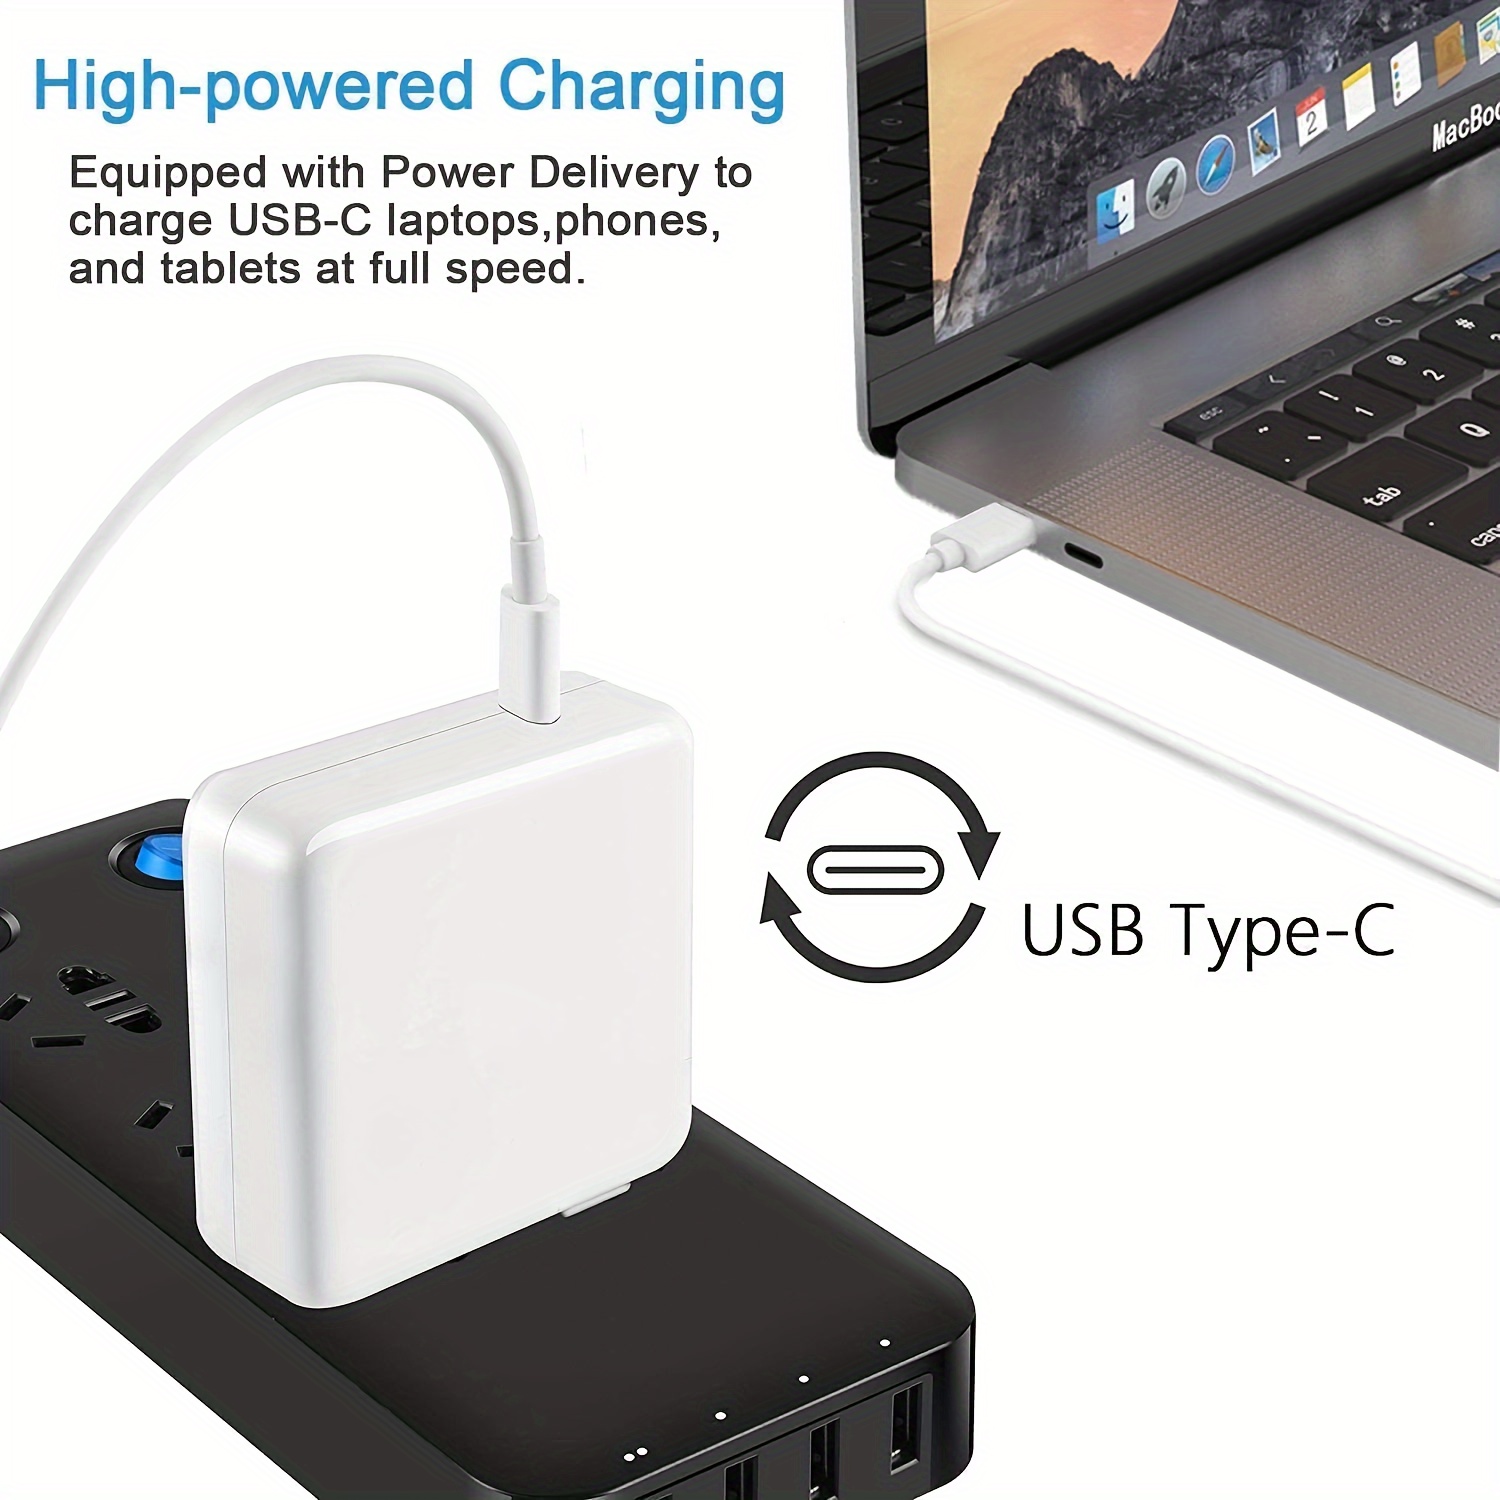 Mac Book Pro Charger [MFi Certified] 67W/96W/118W USB C Power Adapter Mac  Book Charger 7.2Ft Cable Compatible with Mac Book Pro,Mac Book Air 16 15 14  13 inch, iPad Pro and All USB C Device : Electronics 